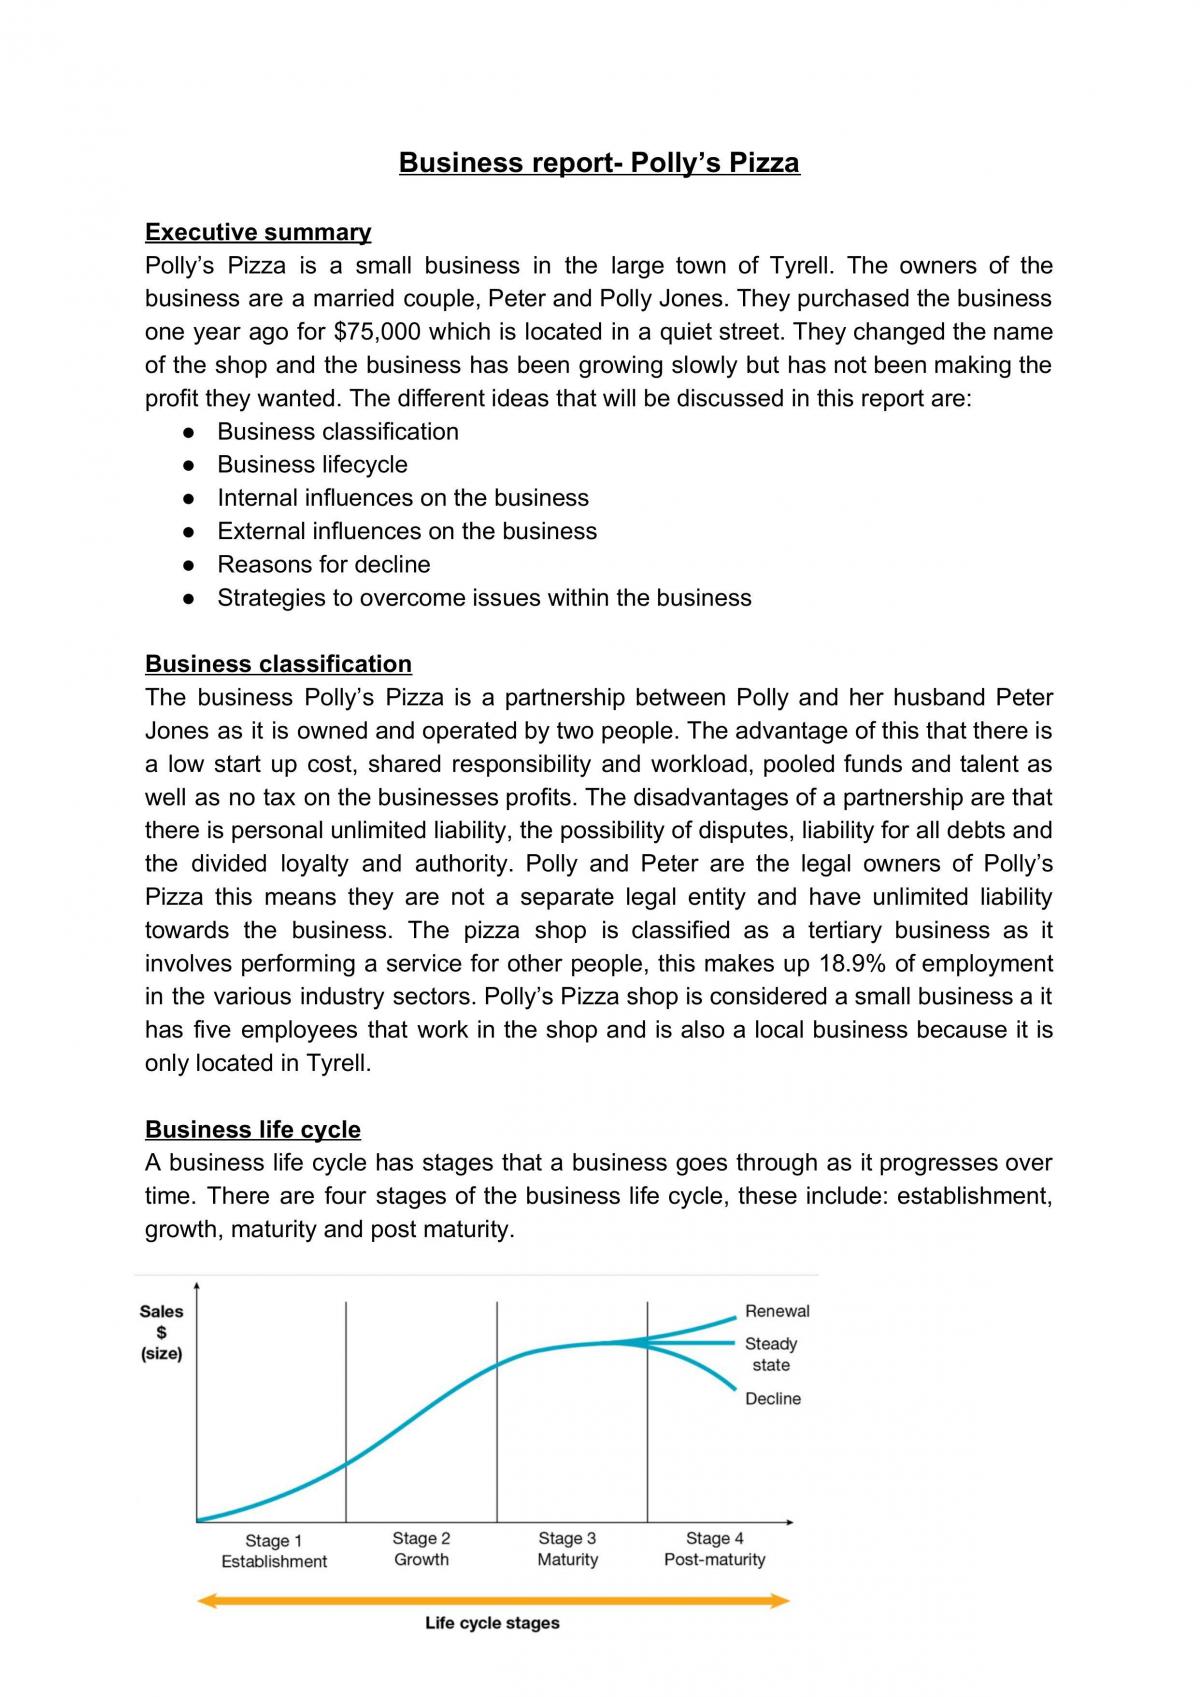 Business Report - Page 1